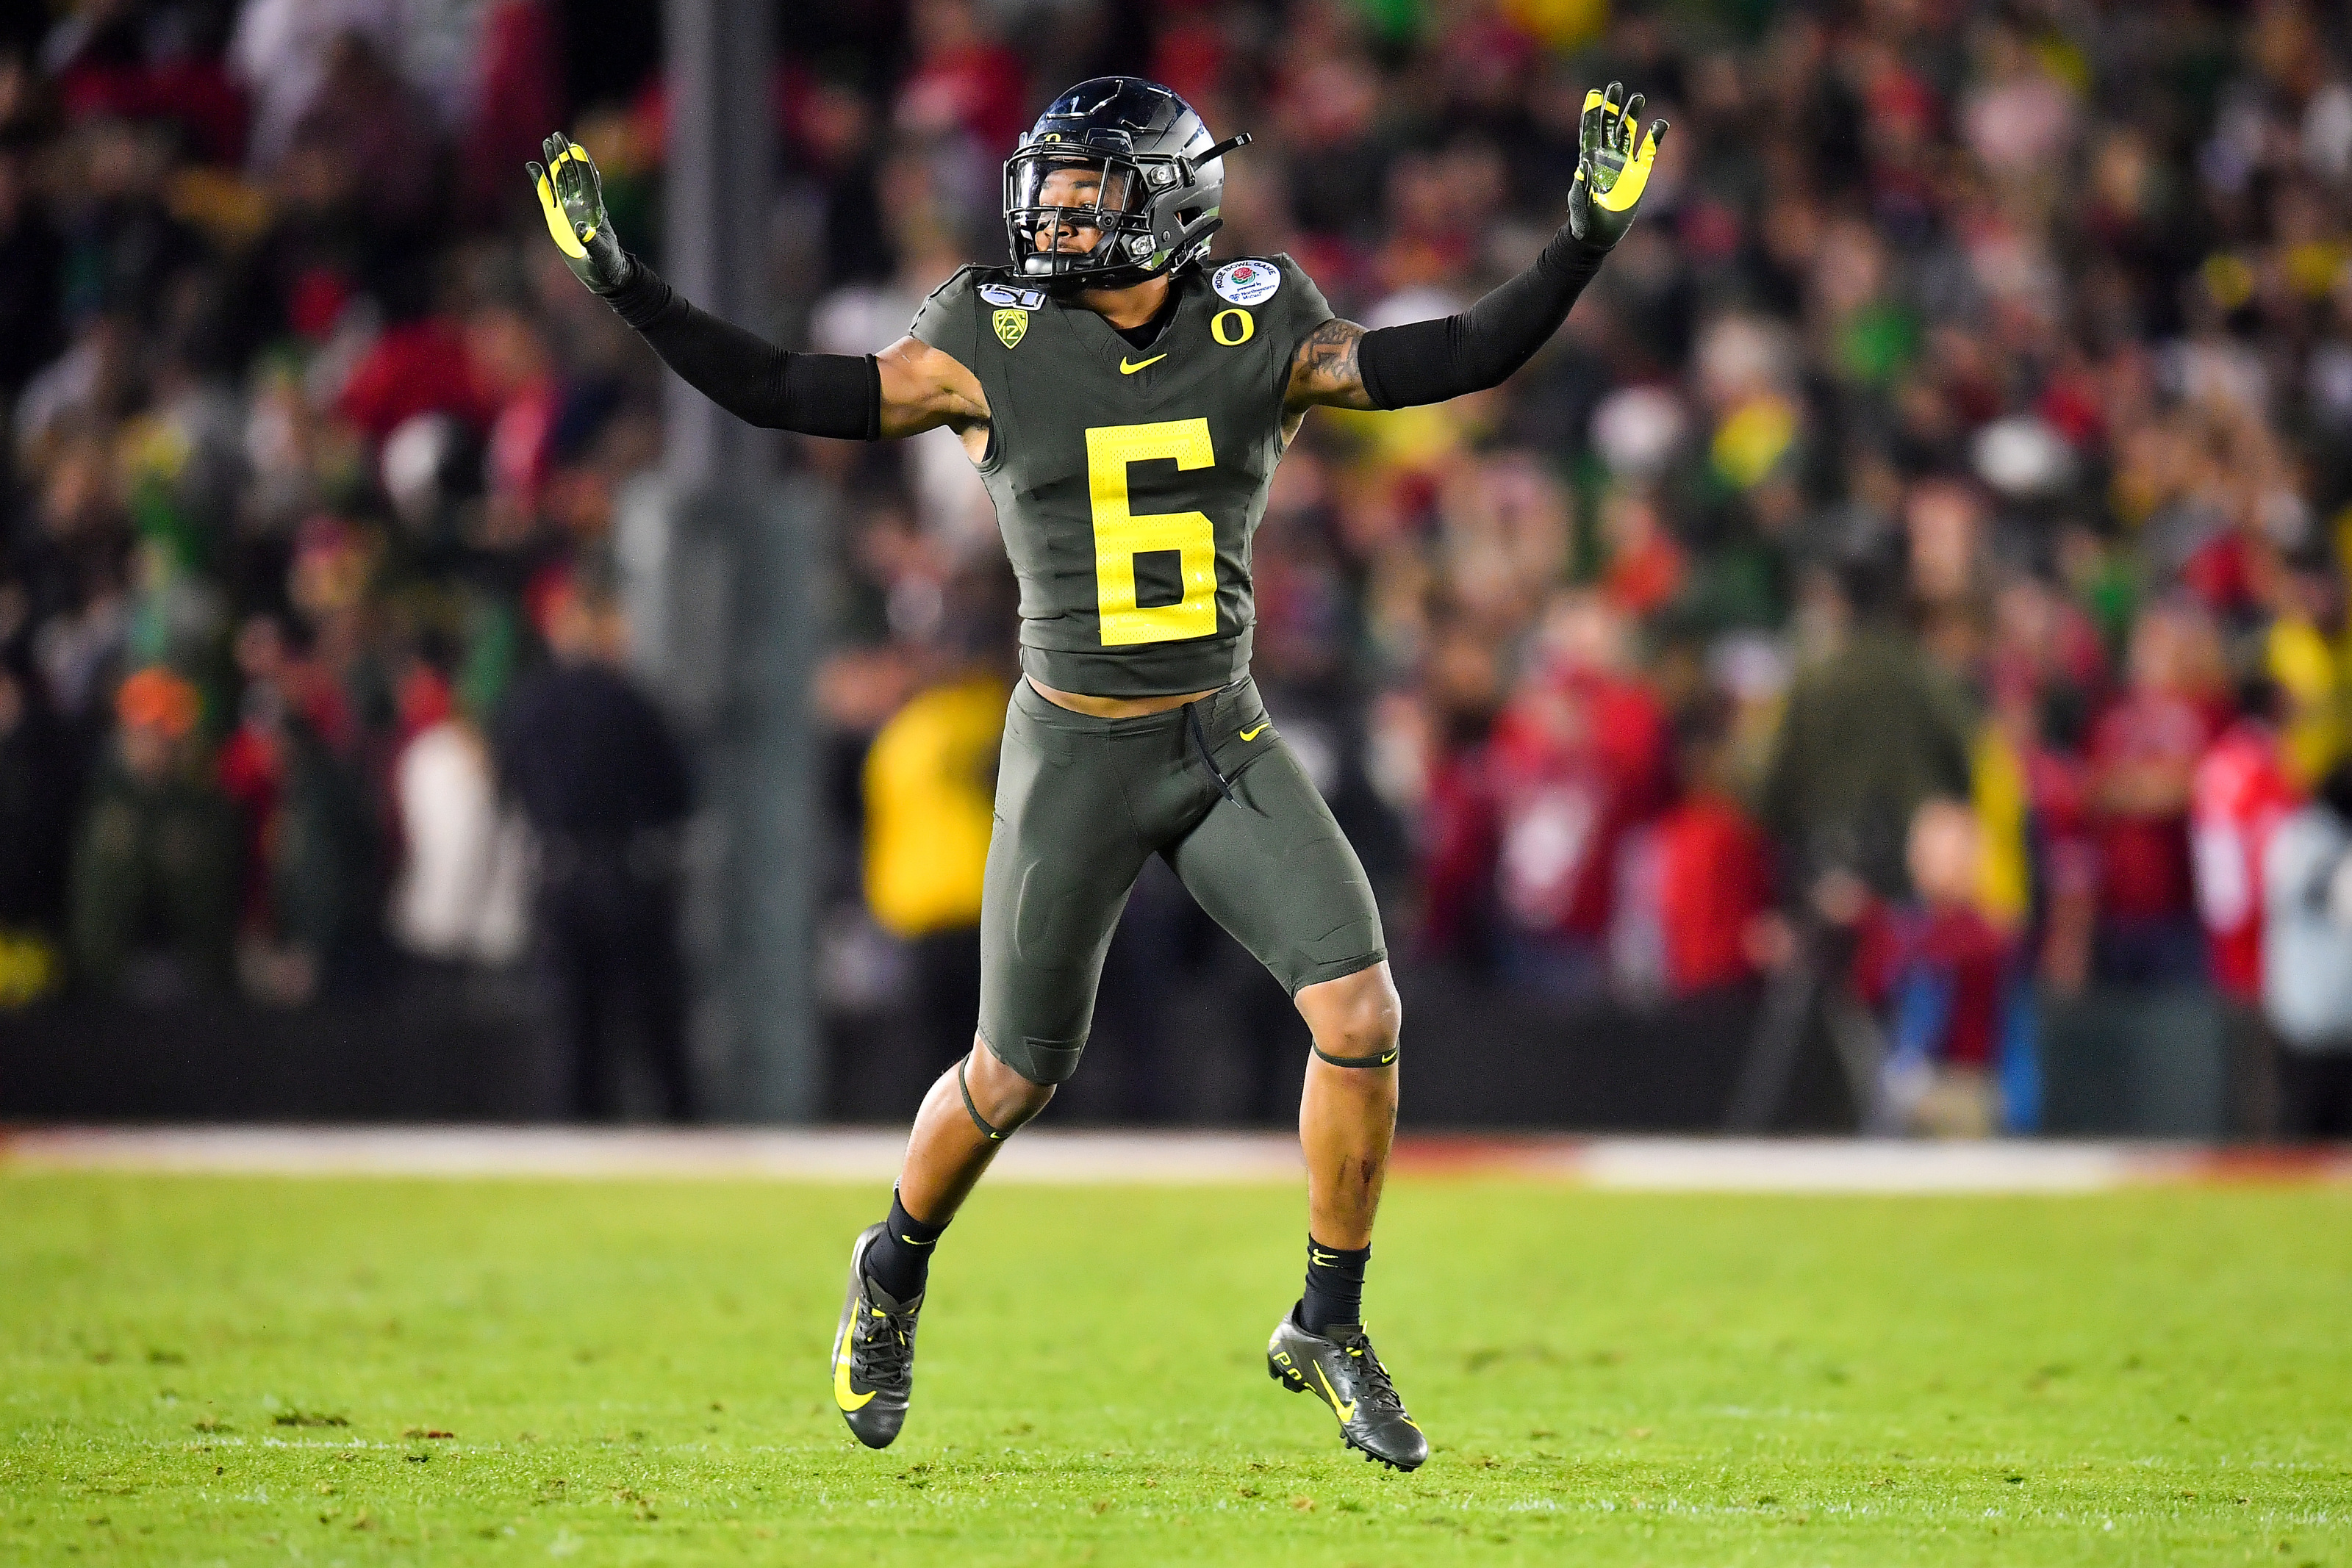 Strong Oregon secondary loses Deommodore Lenoir to 2021 NFL Draft